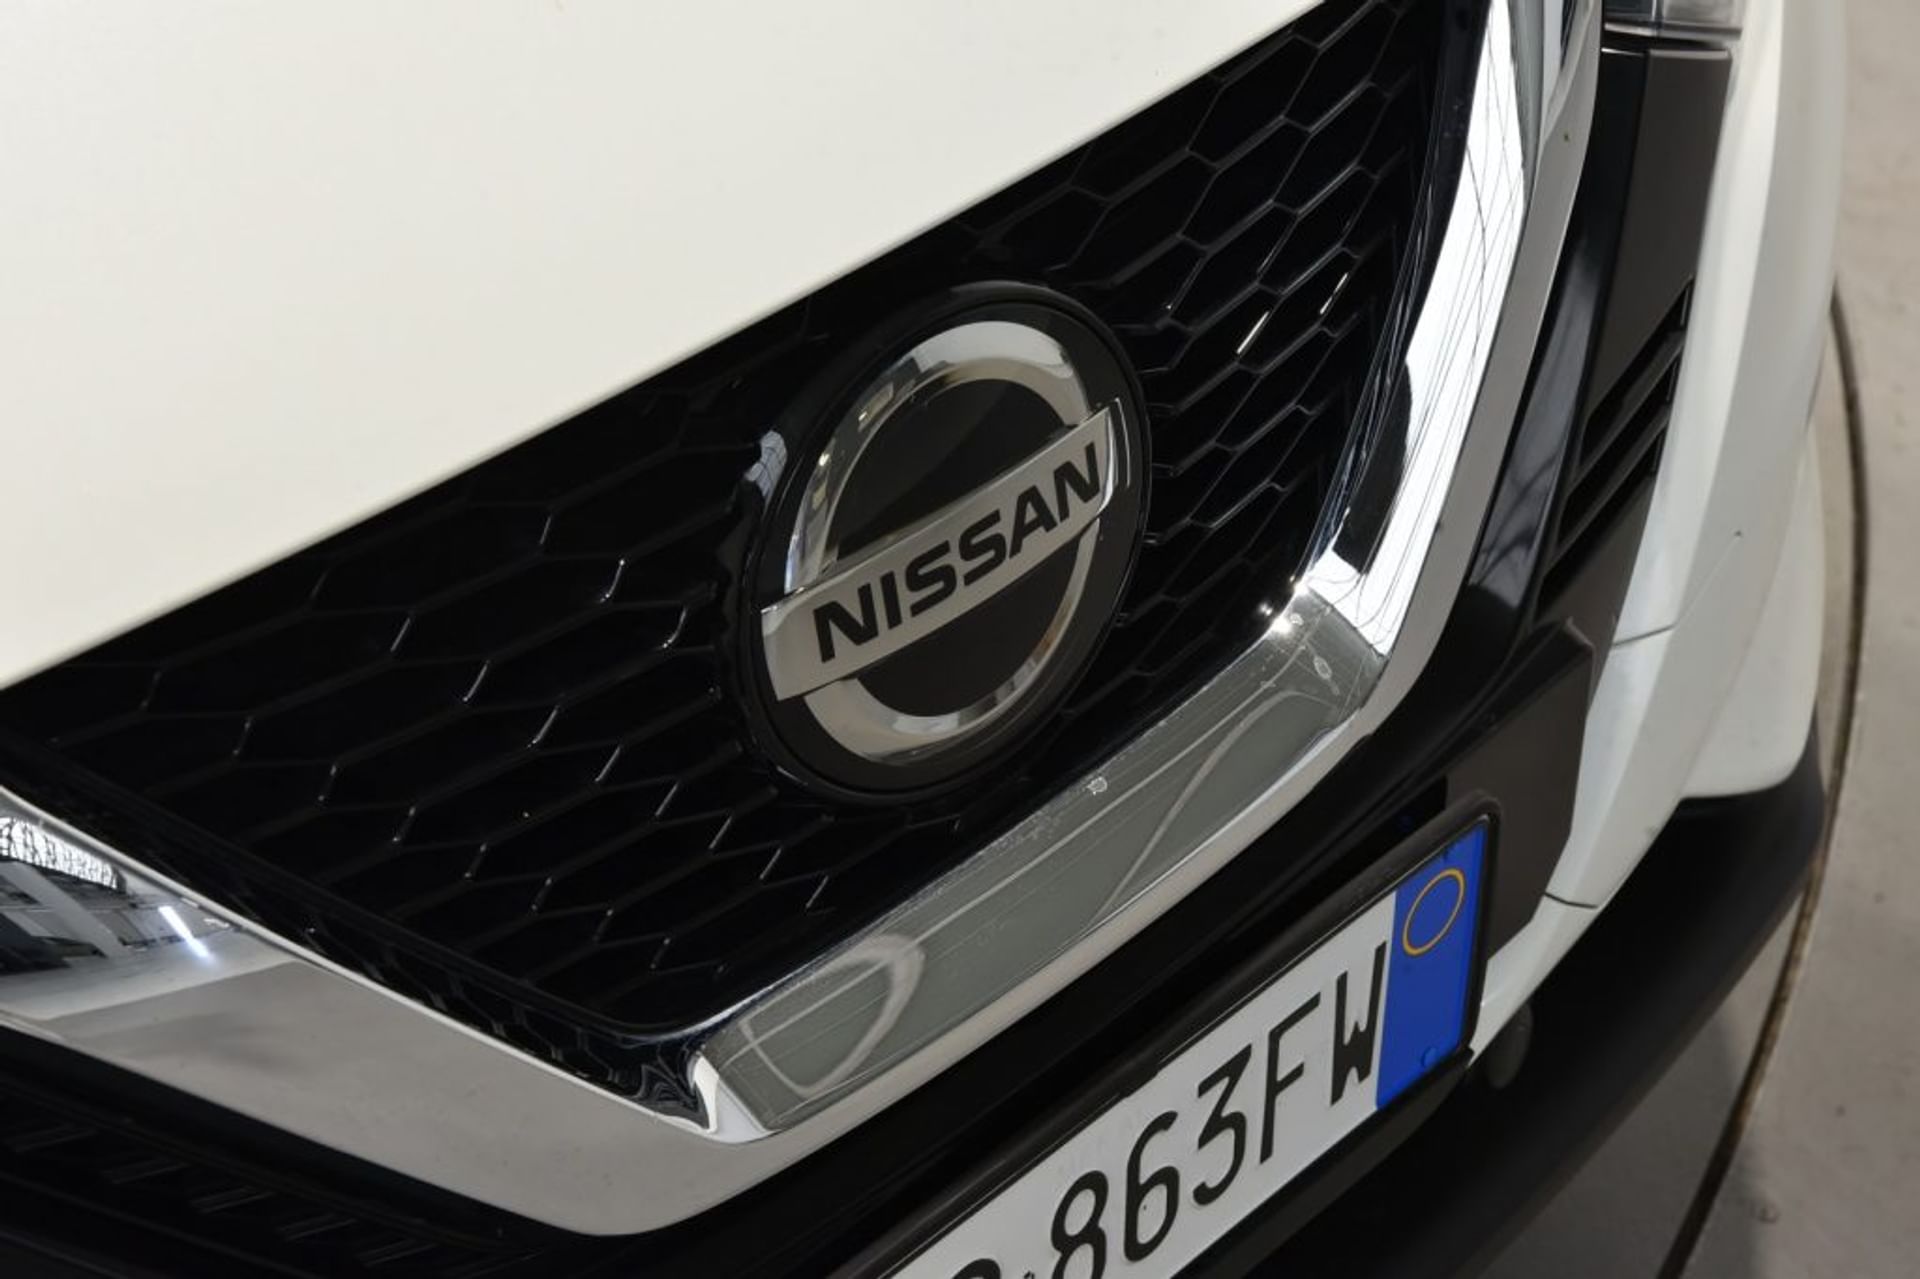 Nissan 1.6 dCi - Luci